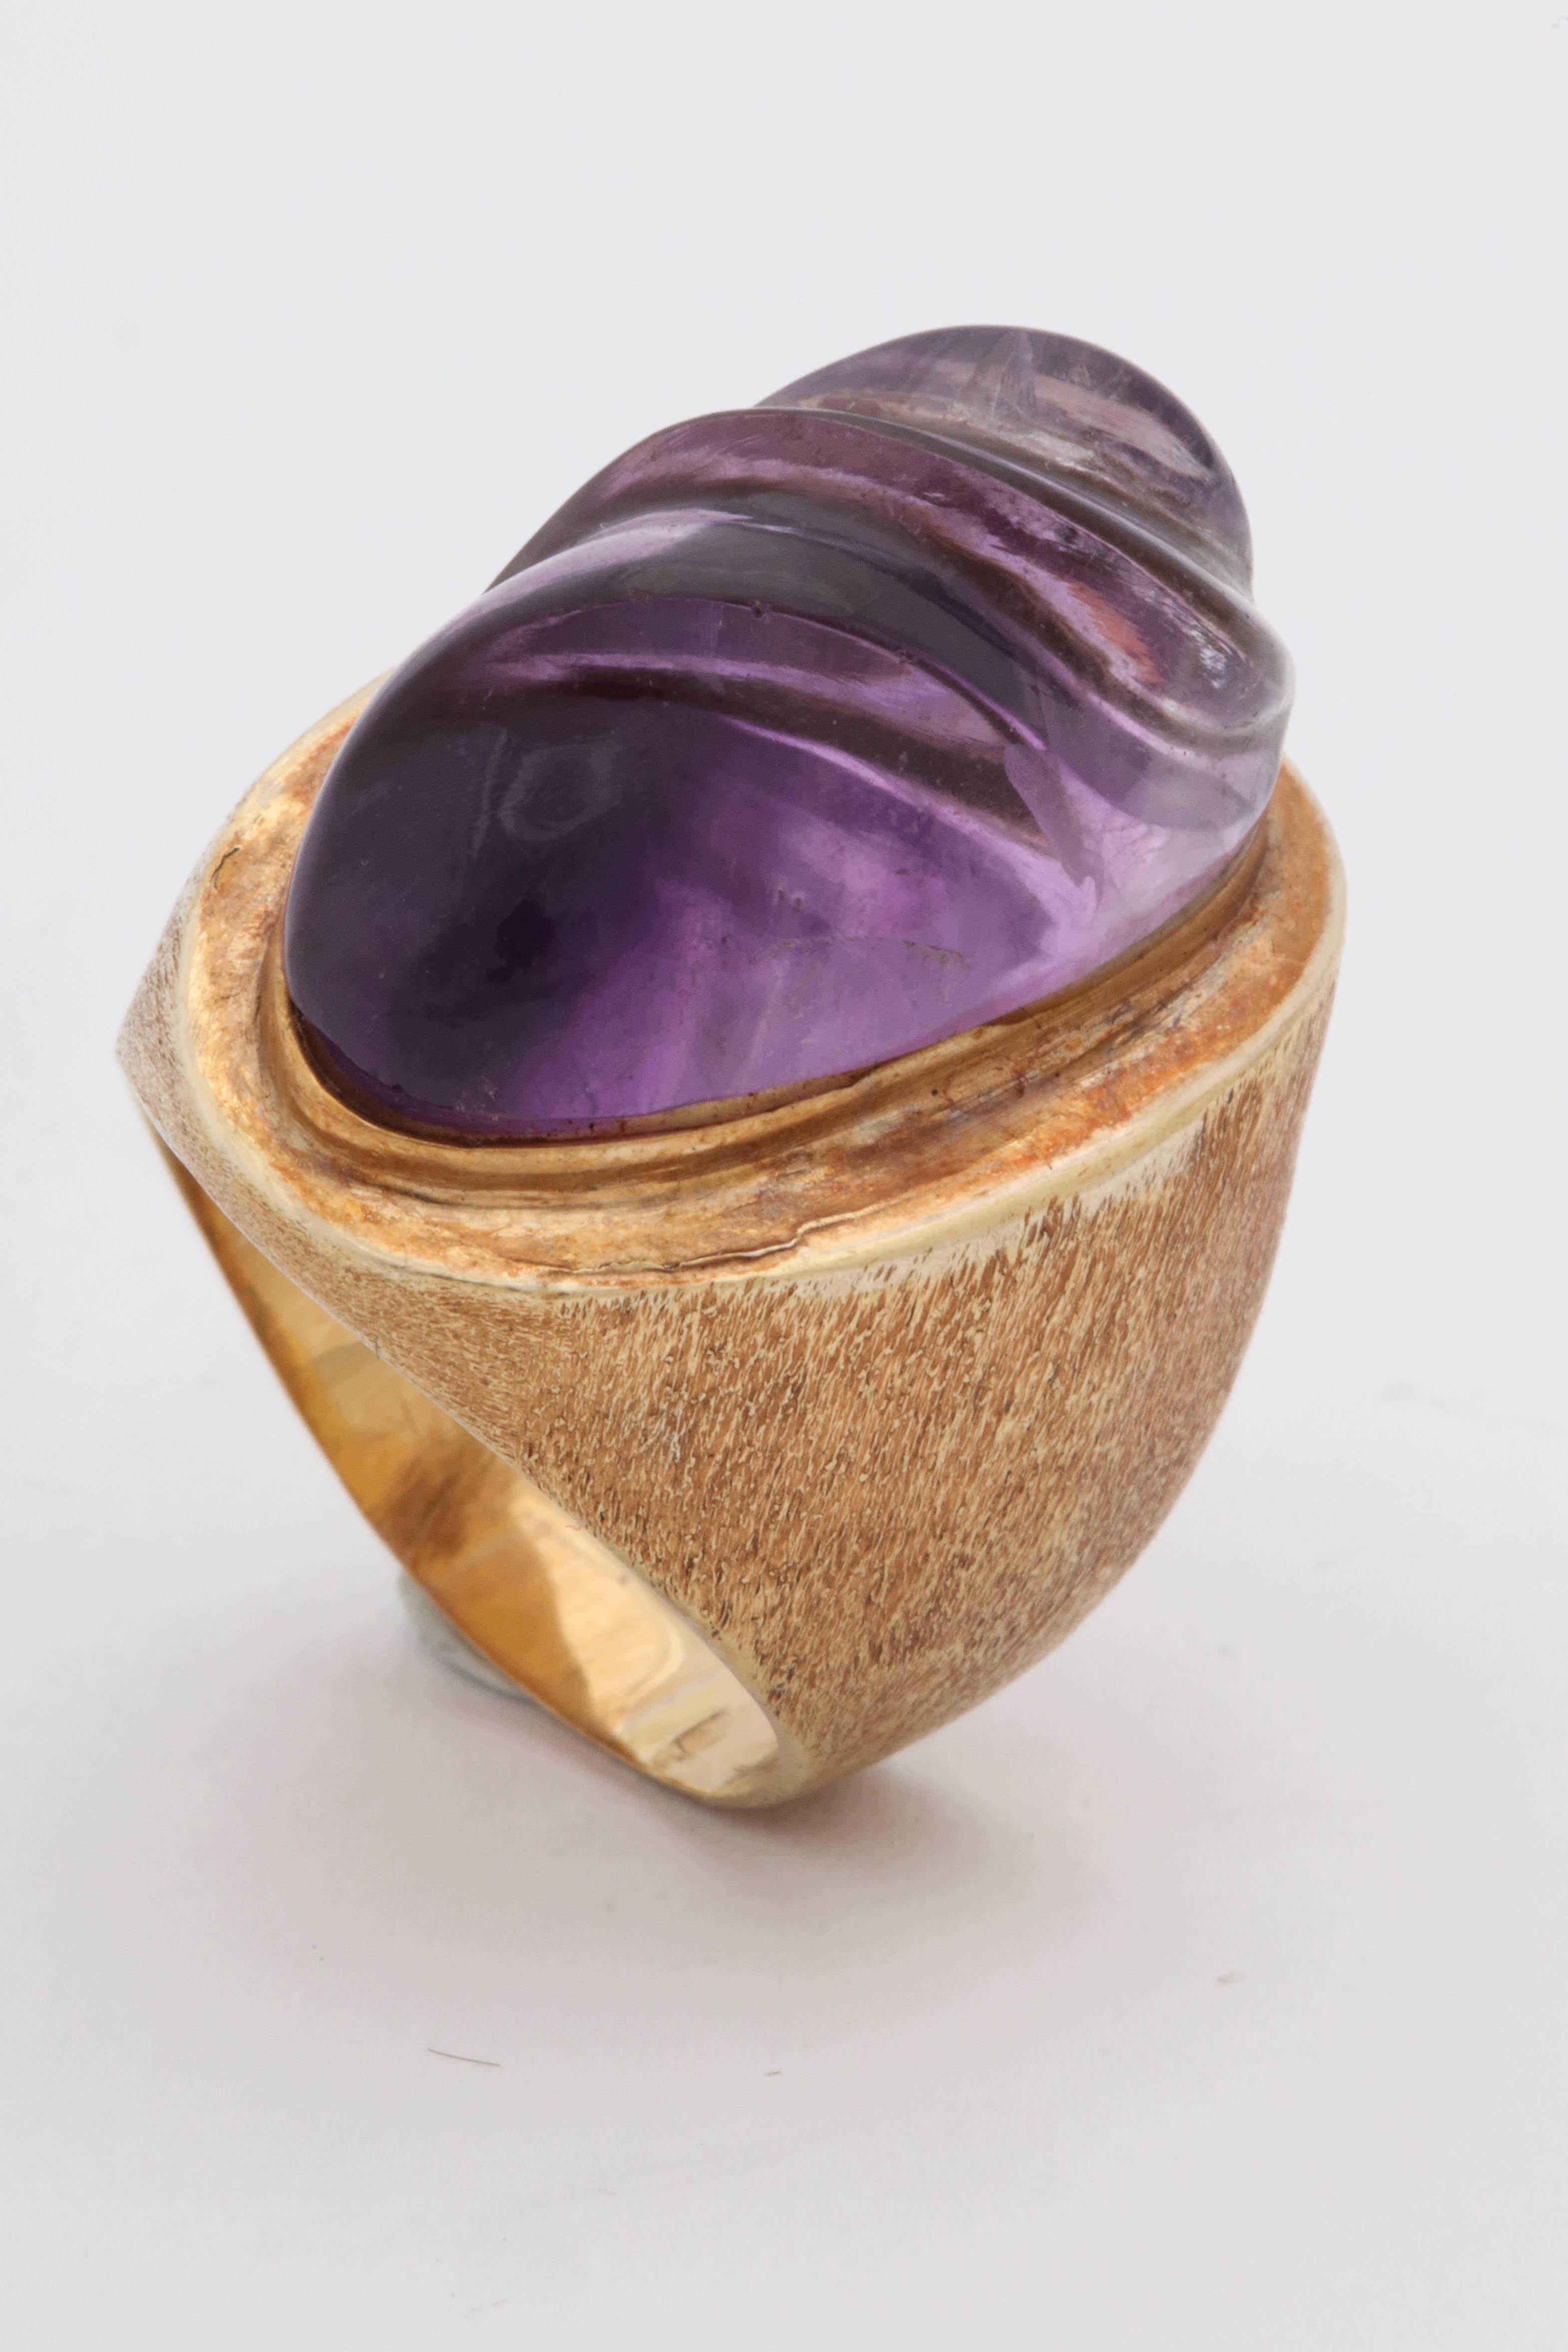 One Cocktail Ring Attributed To Burle Marx Created With A Centered Swirl Carved Amethyst Stone Measuring Approximately 25 Mm Or Approximatey 10 Carats. Rig Is Finished With A Brushed Textured Engraved Florentined Gold Created In 18kt Gold. Ring